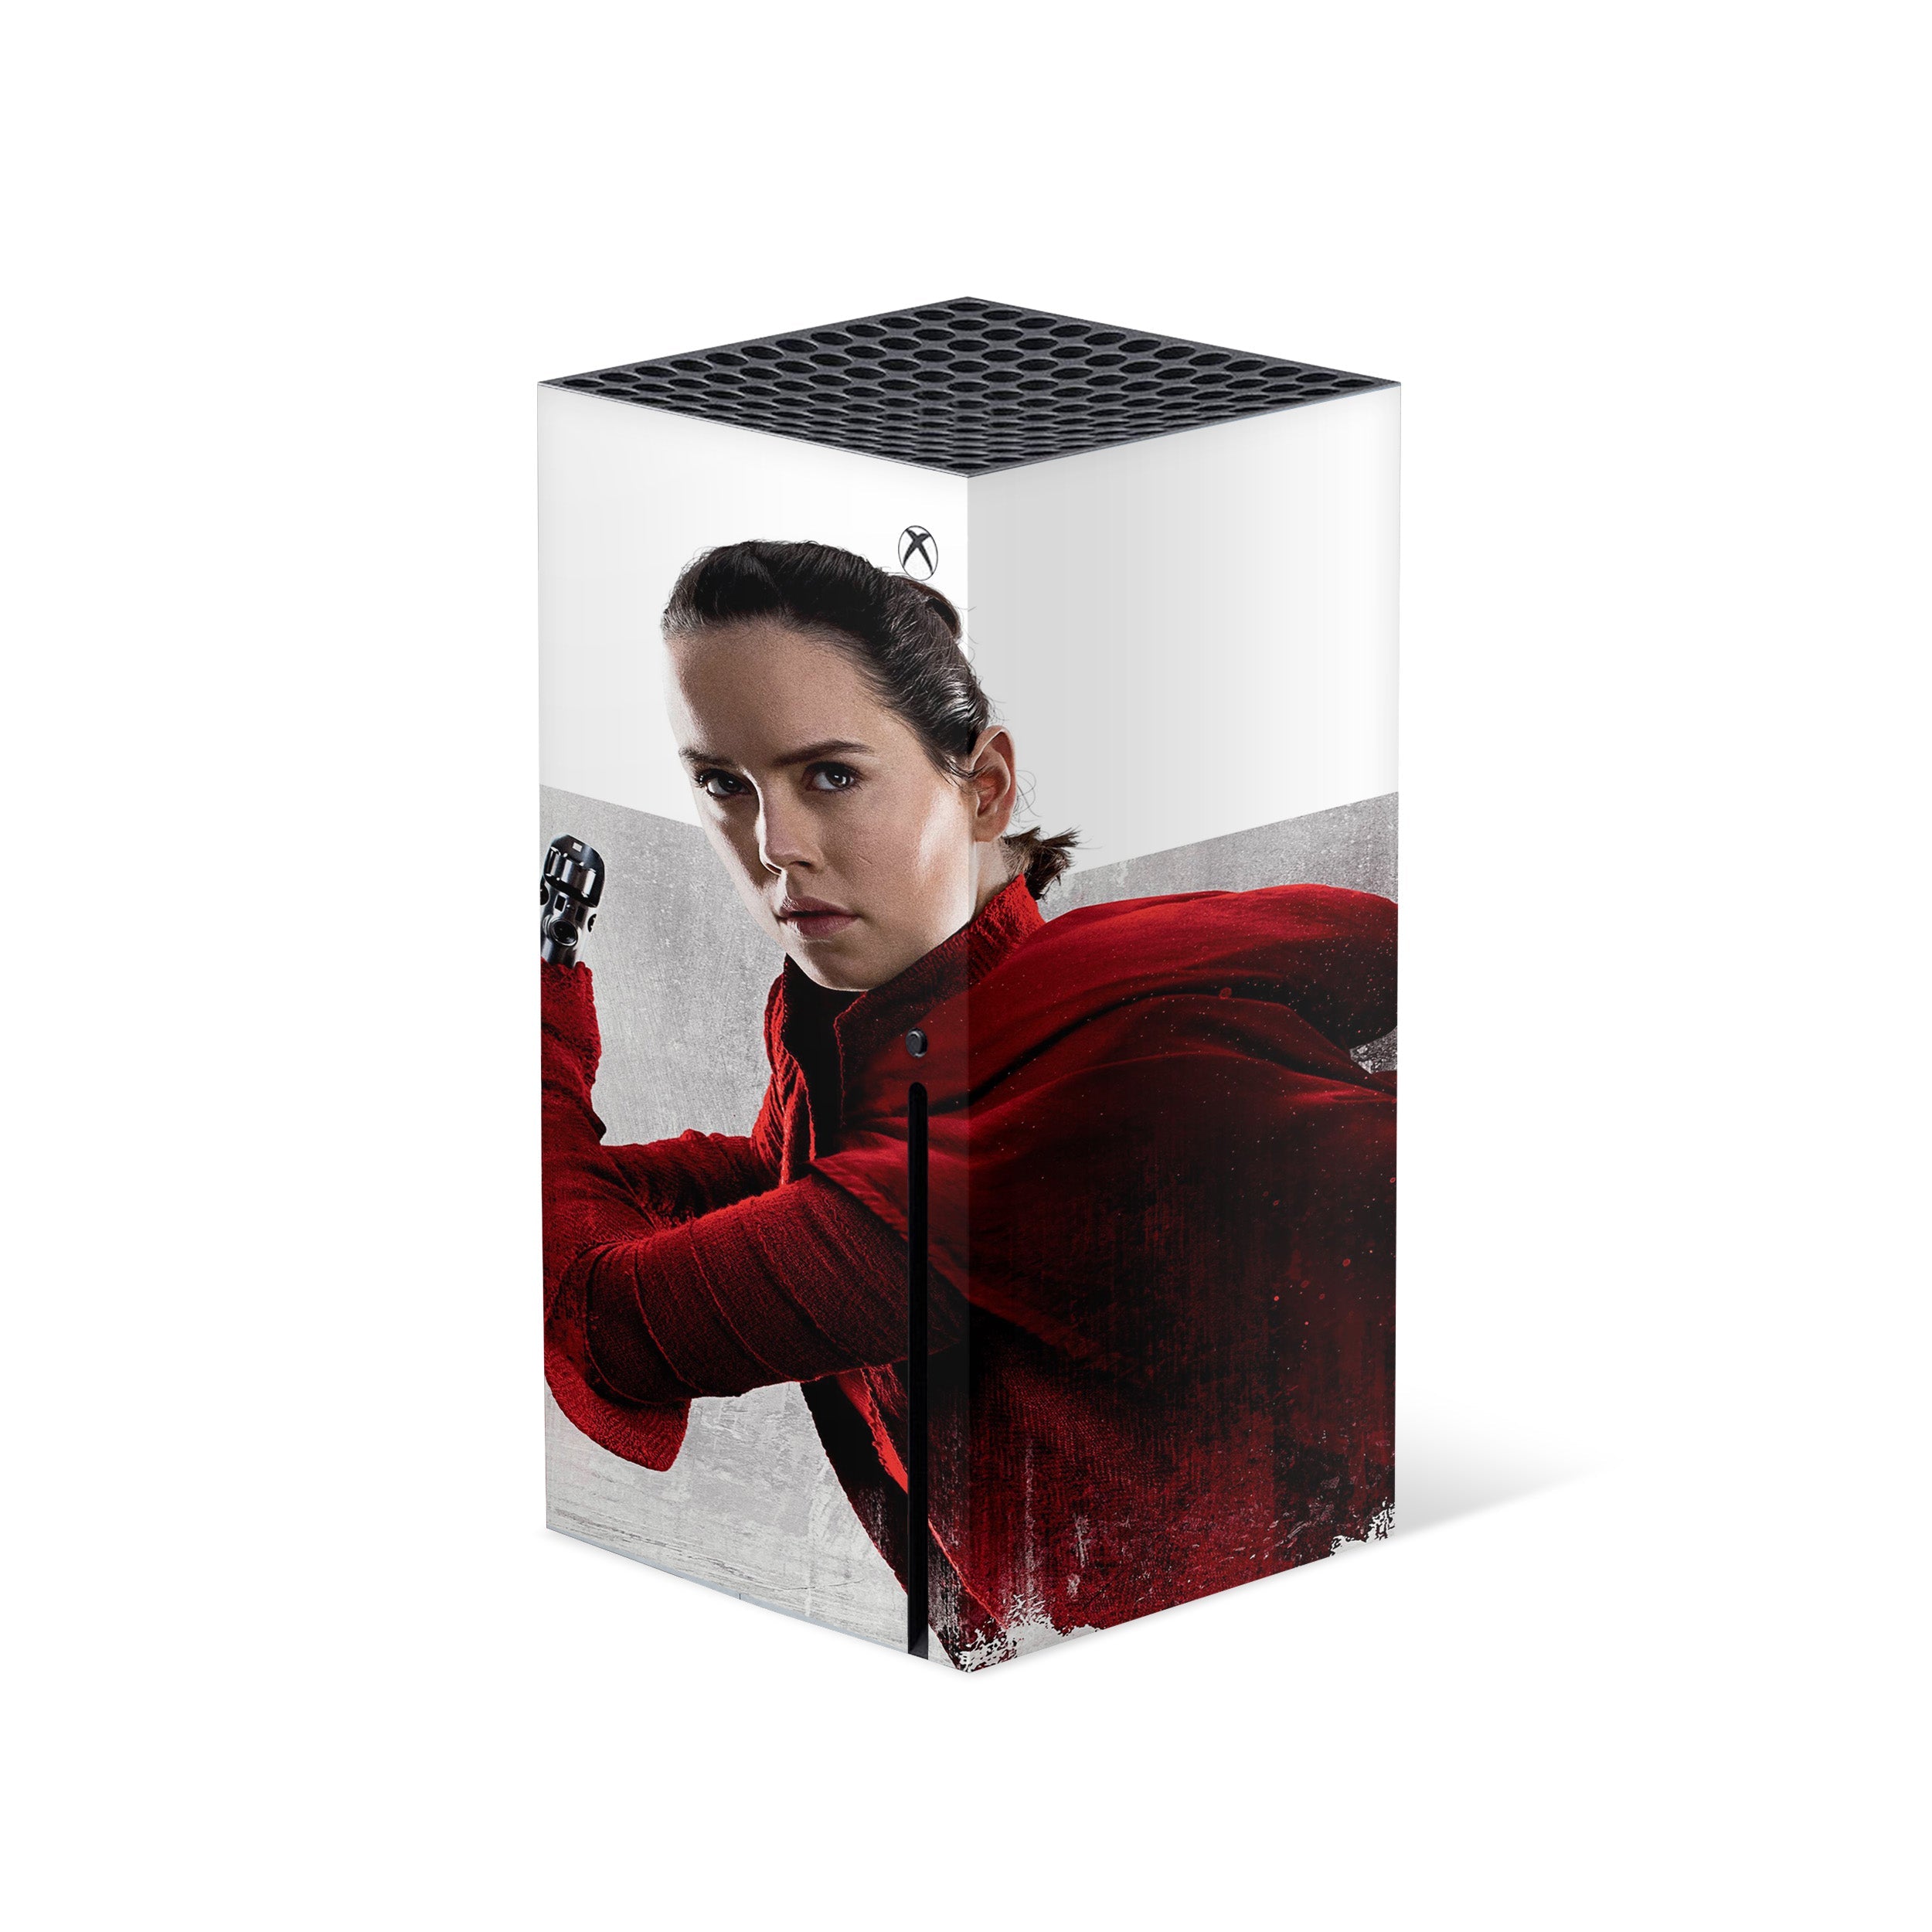 A video game skin featuring a Star Wars Rey design for the Xbox Series X.